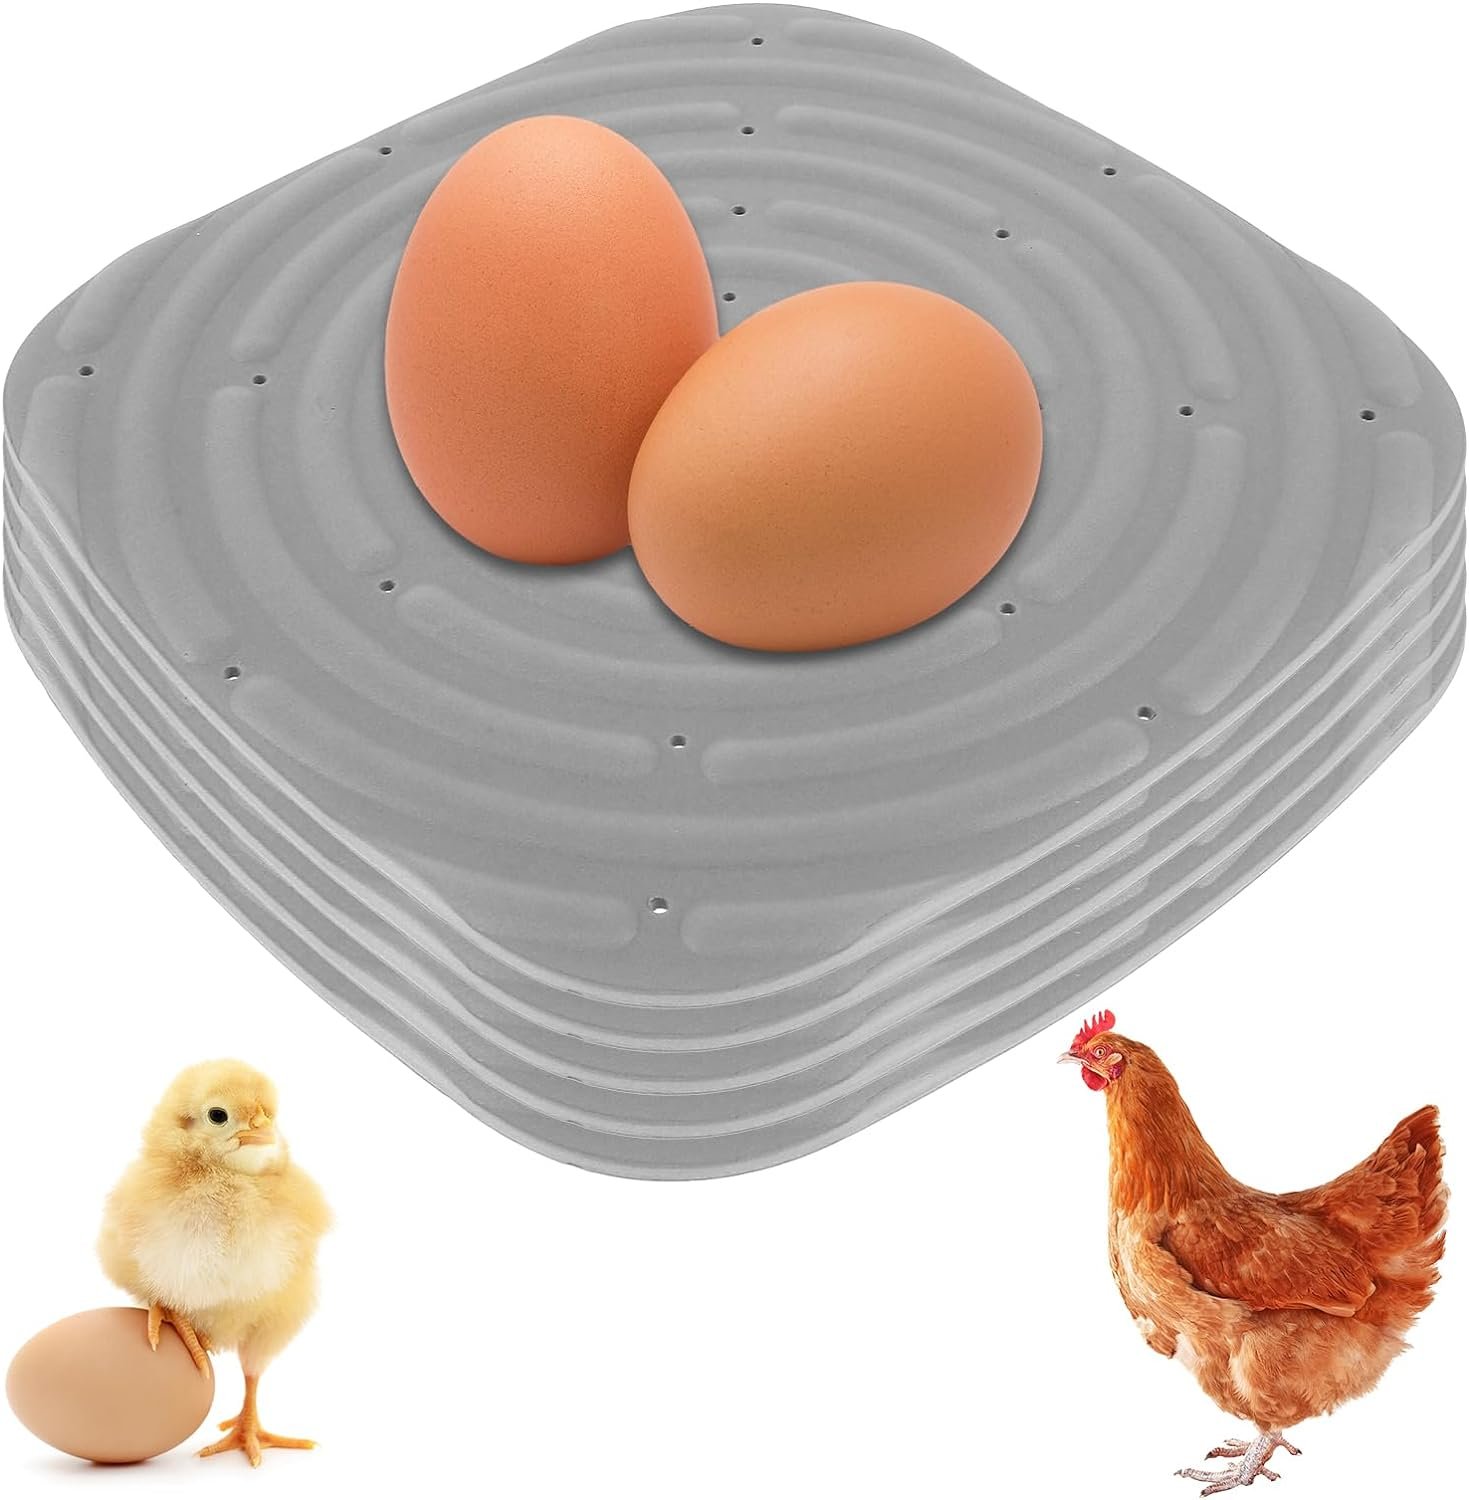 EUWBSSR 5Pcs Washable Chicken Nesting Pads for Laying Eggs Chicken Nesting Box Mat Reusable Chicken Bedding Pad Soft Sponge Chicken Nesting Liner Poultry Hen for Coop, Poultry Nest Box Pads